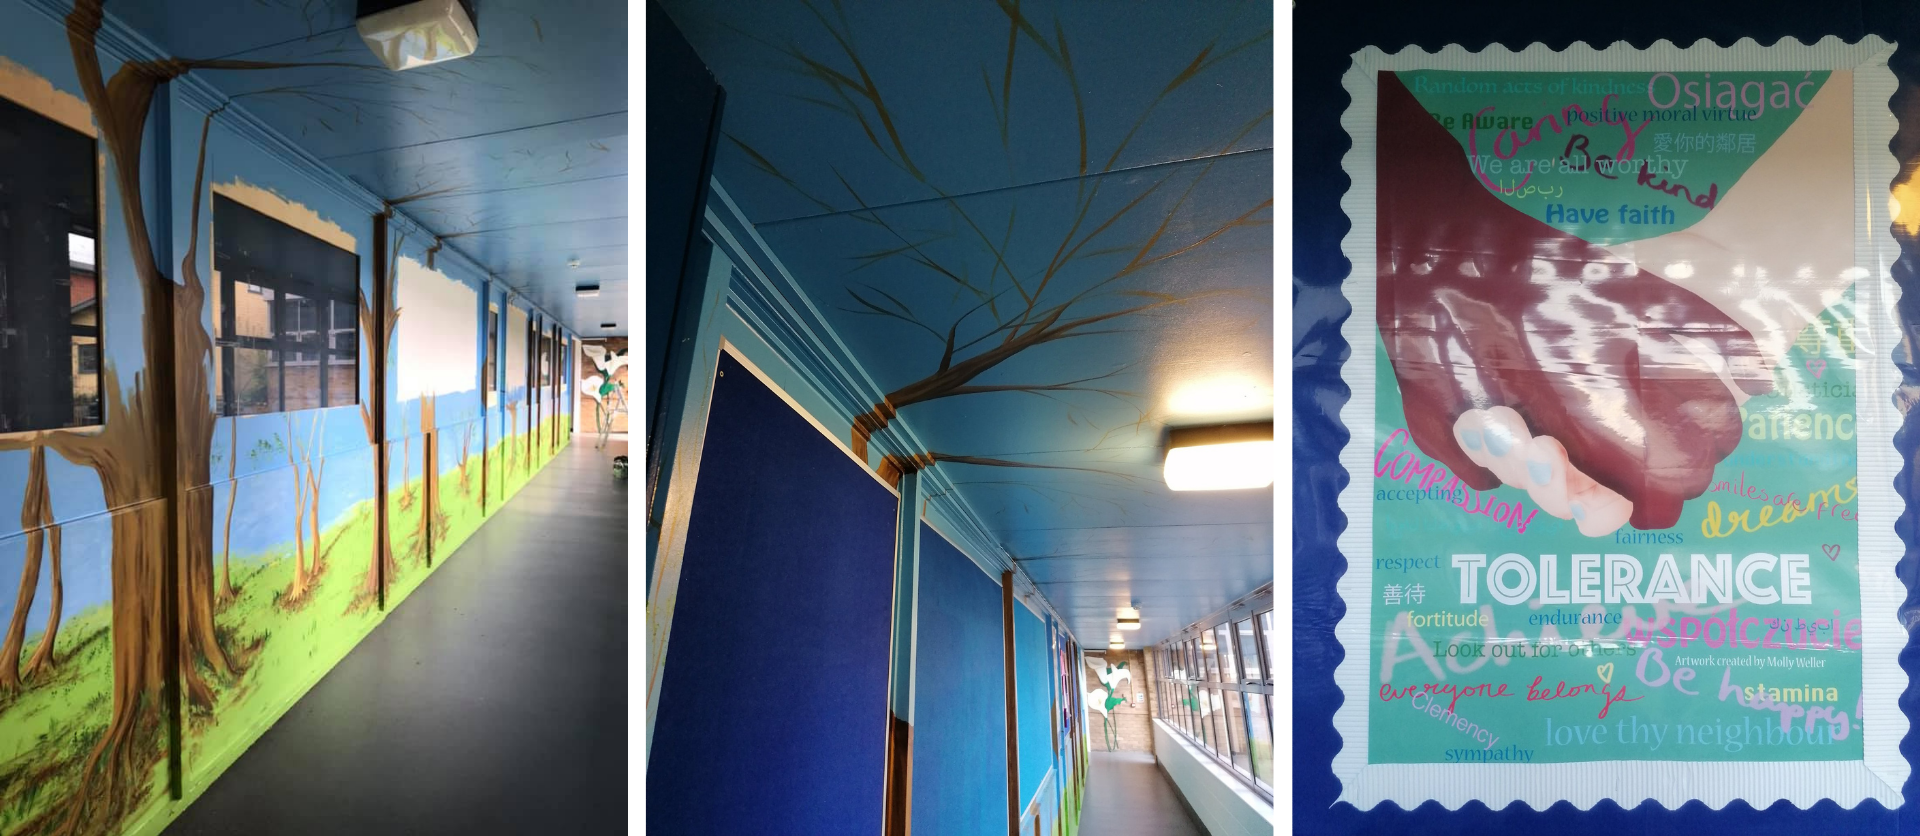 Collage of 3 photos of the Corridor of Values at St Joseph's